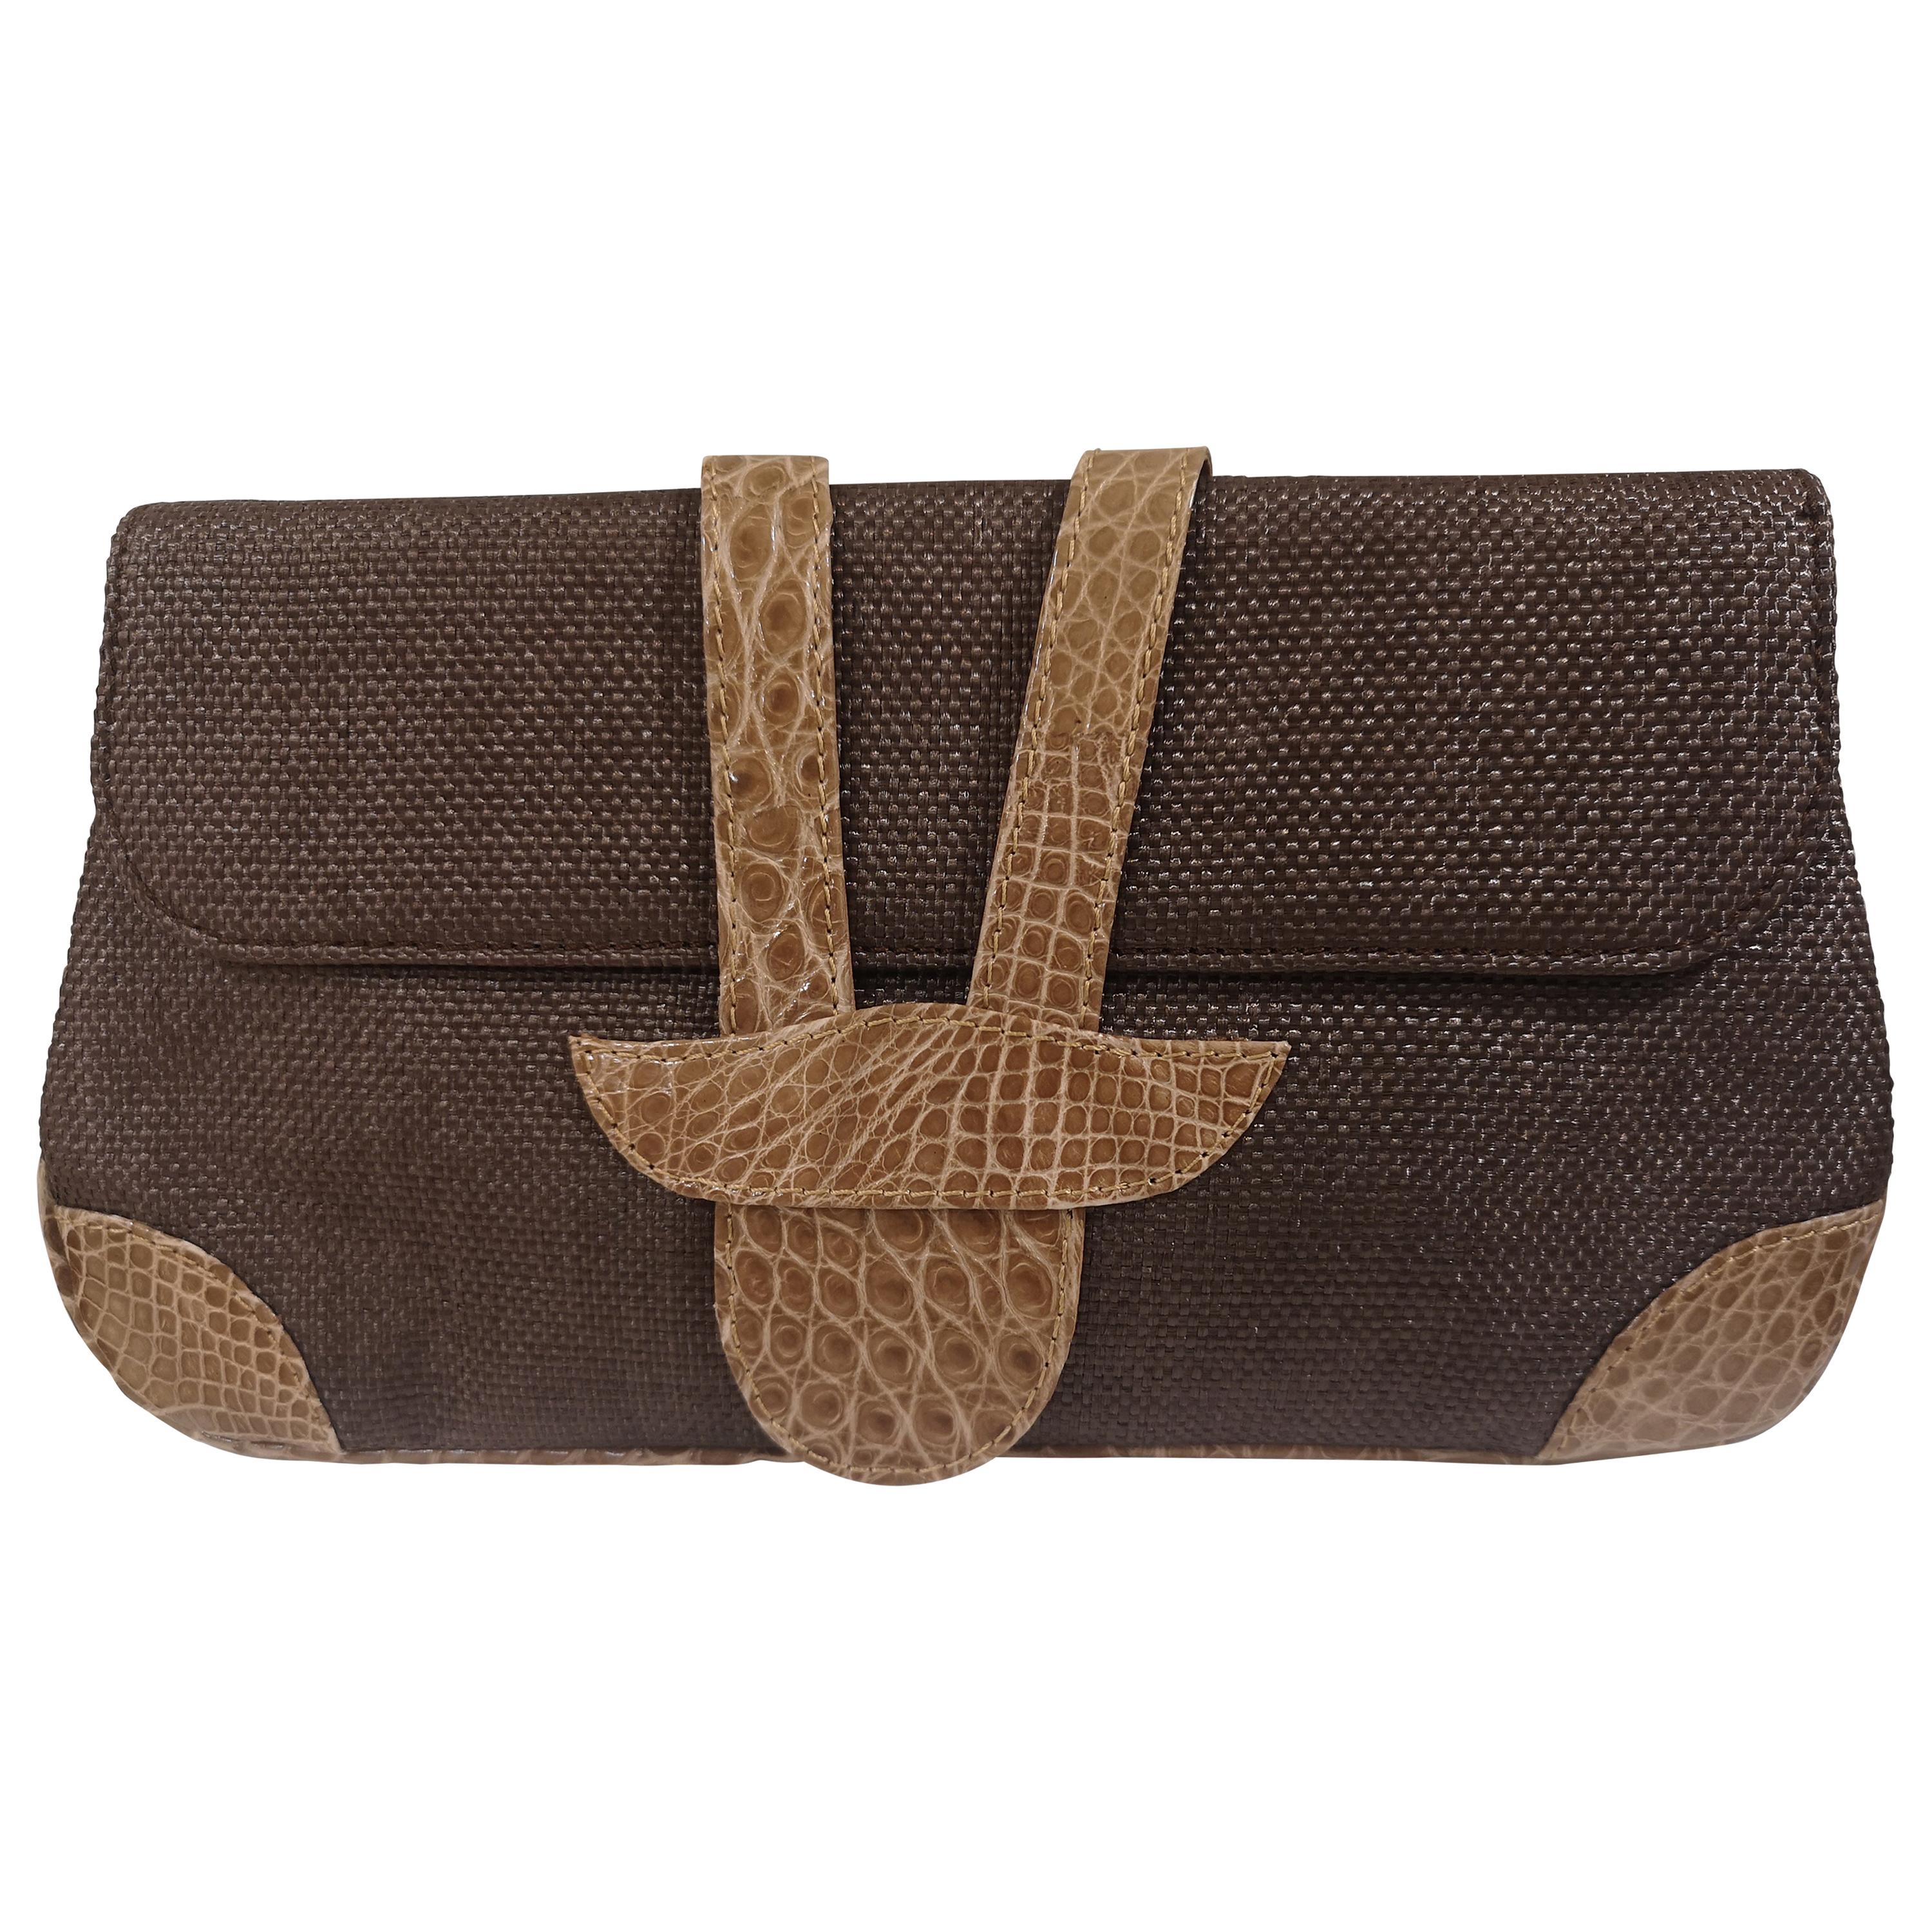 Dotti brown textile and croco print leather clutch 